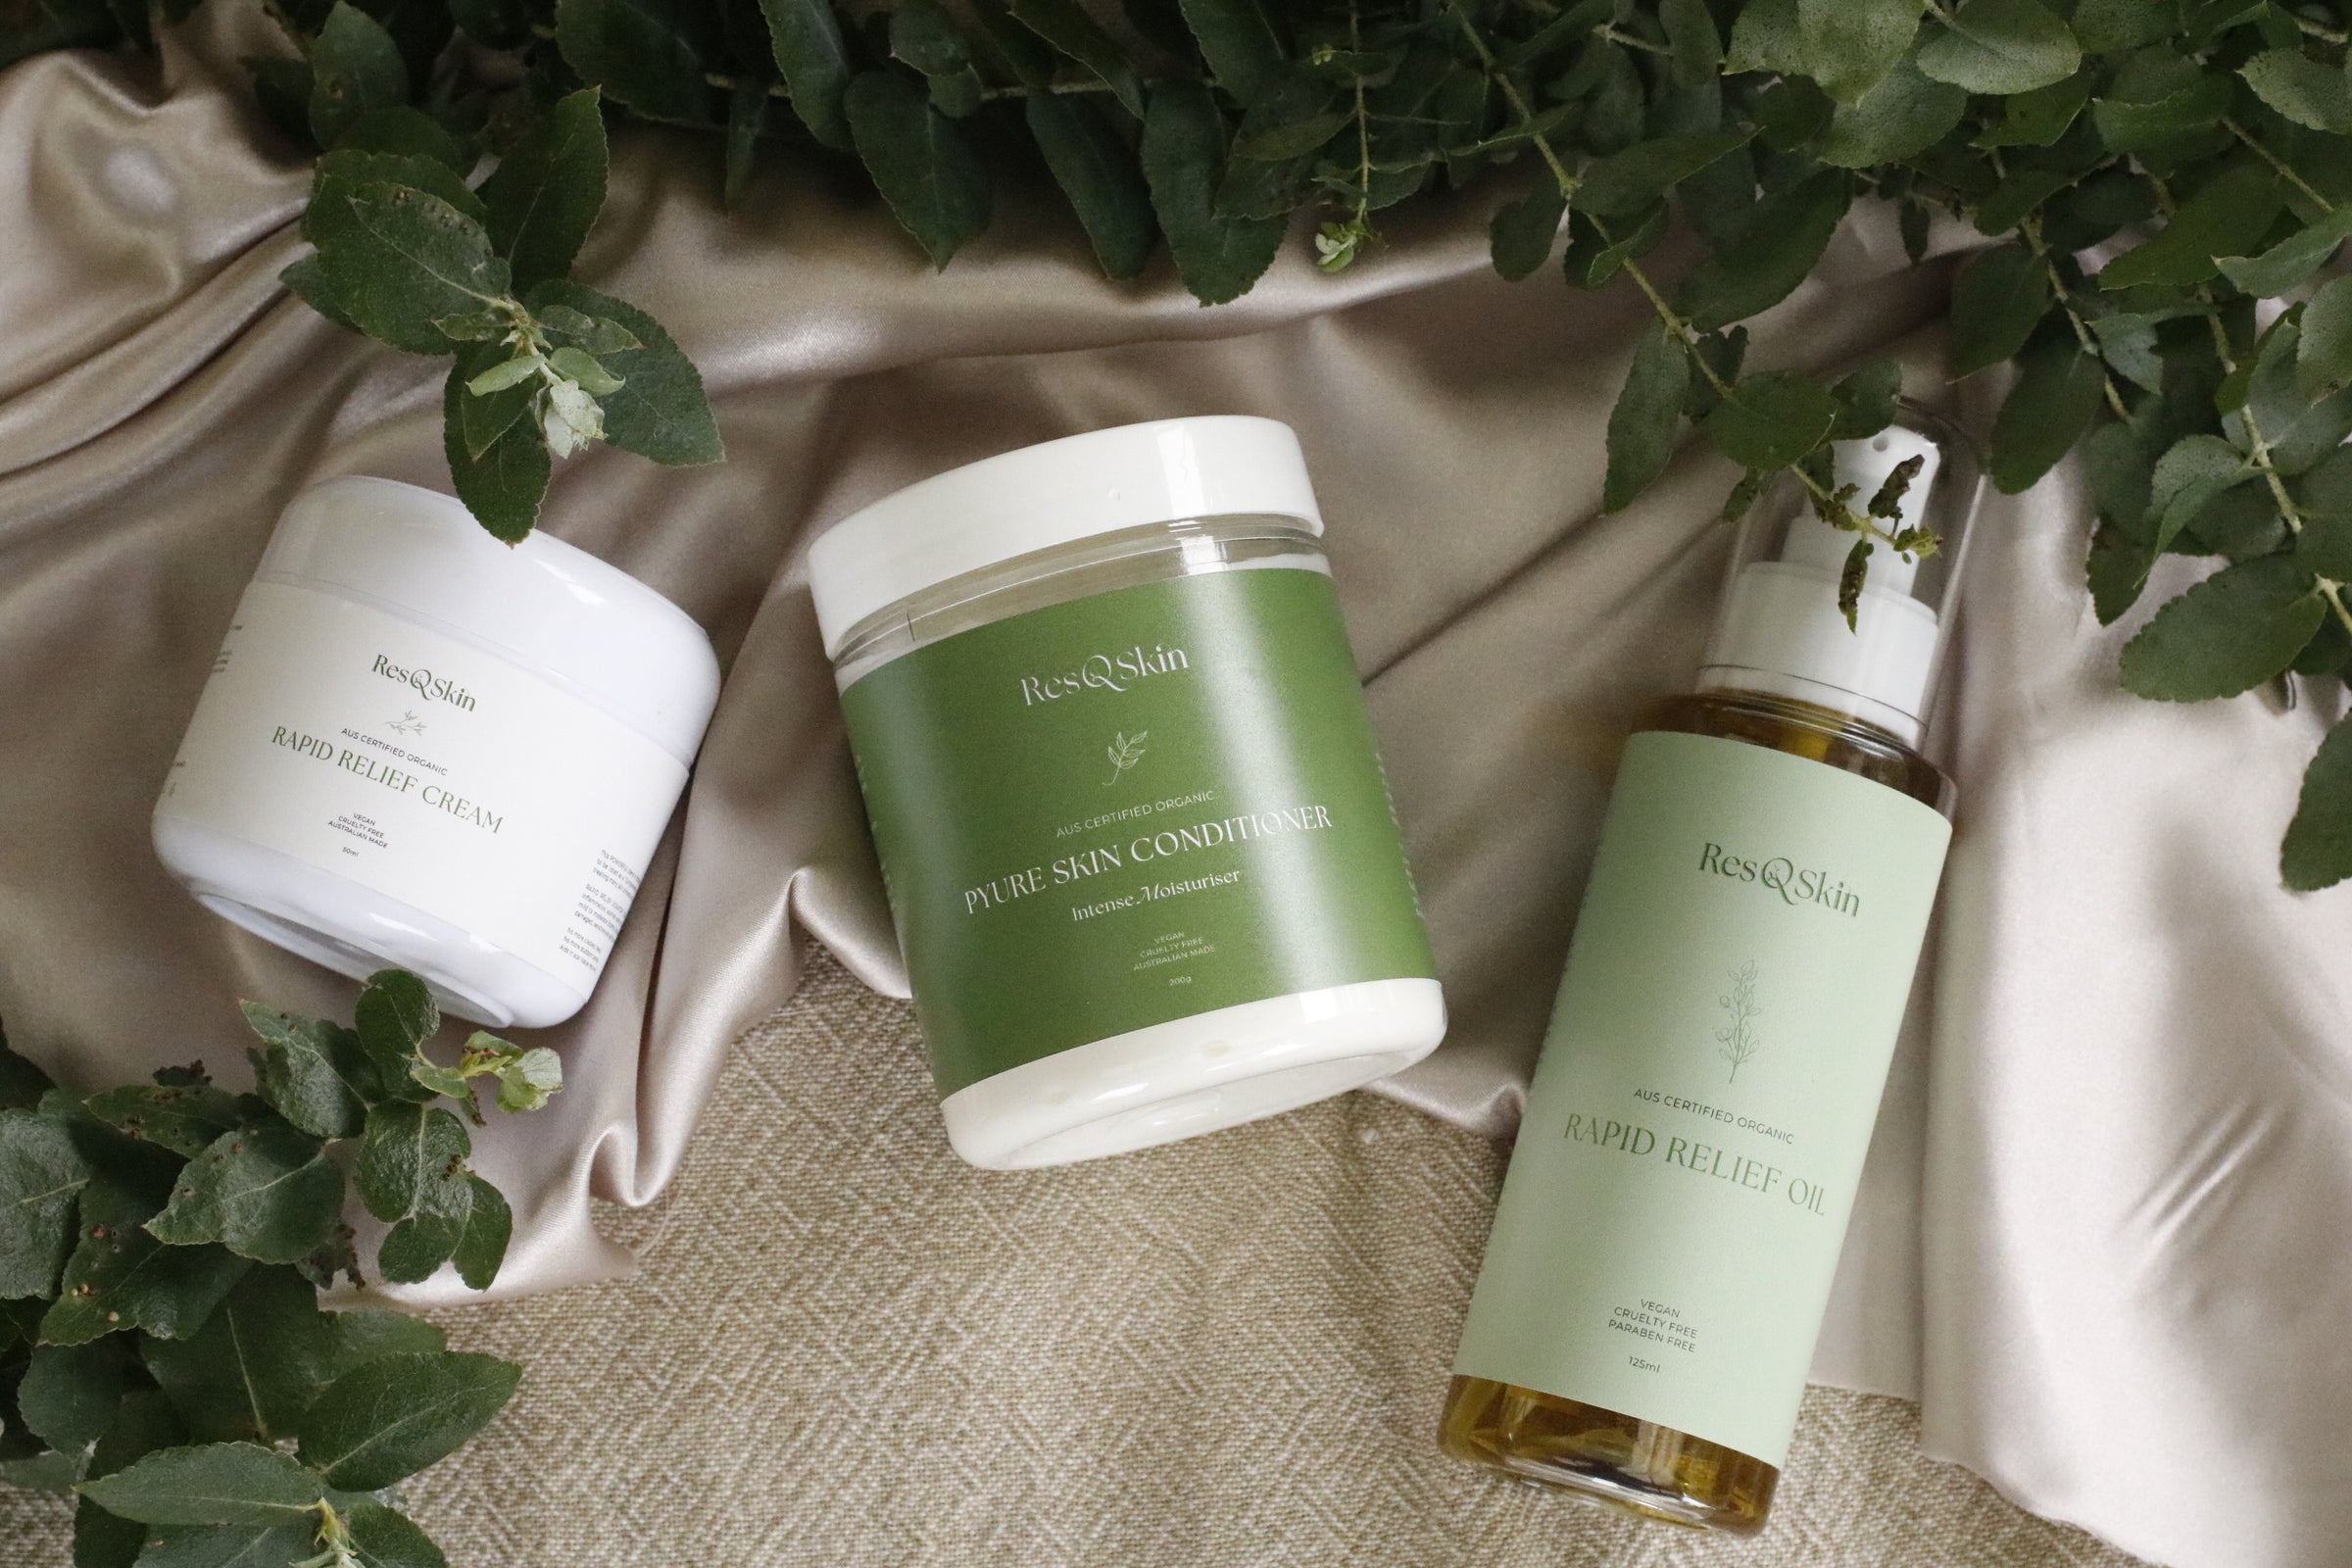 Image of ResQSkin Products, 2 Rapid Relief Cream and a Pyure Skin Conditioner resting on a fabric with leaves hanging out as foreground